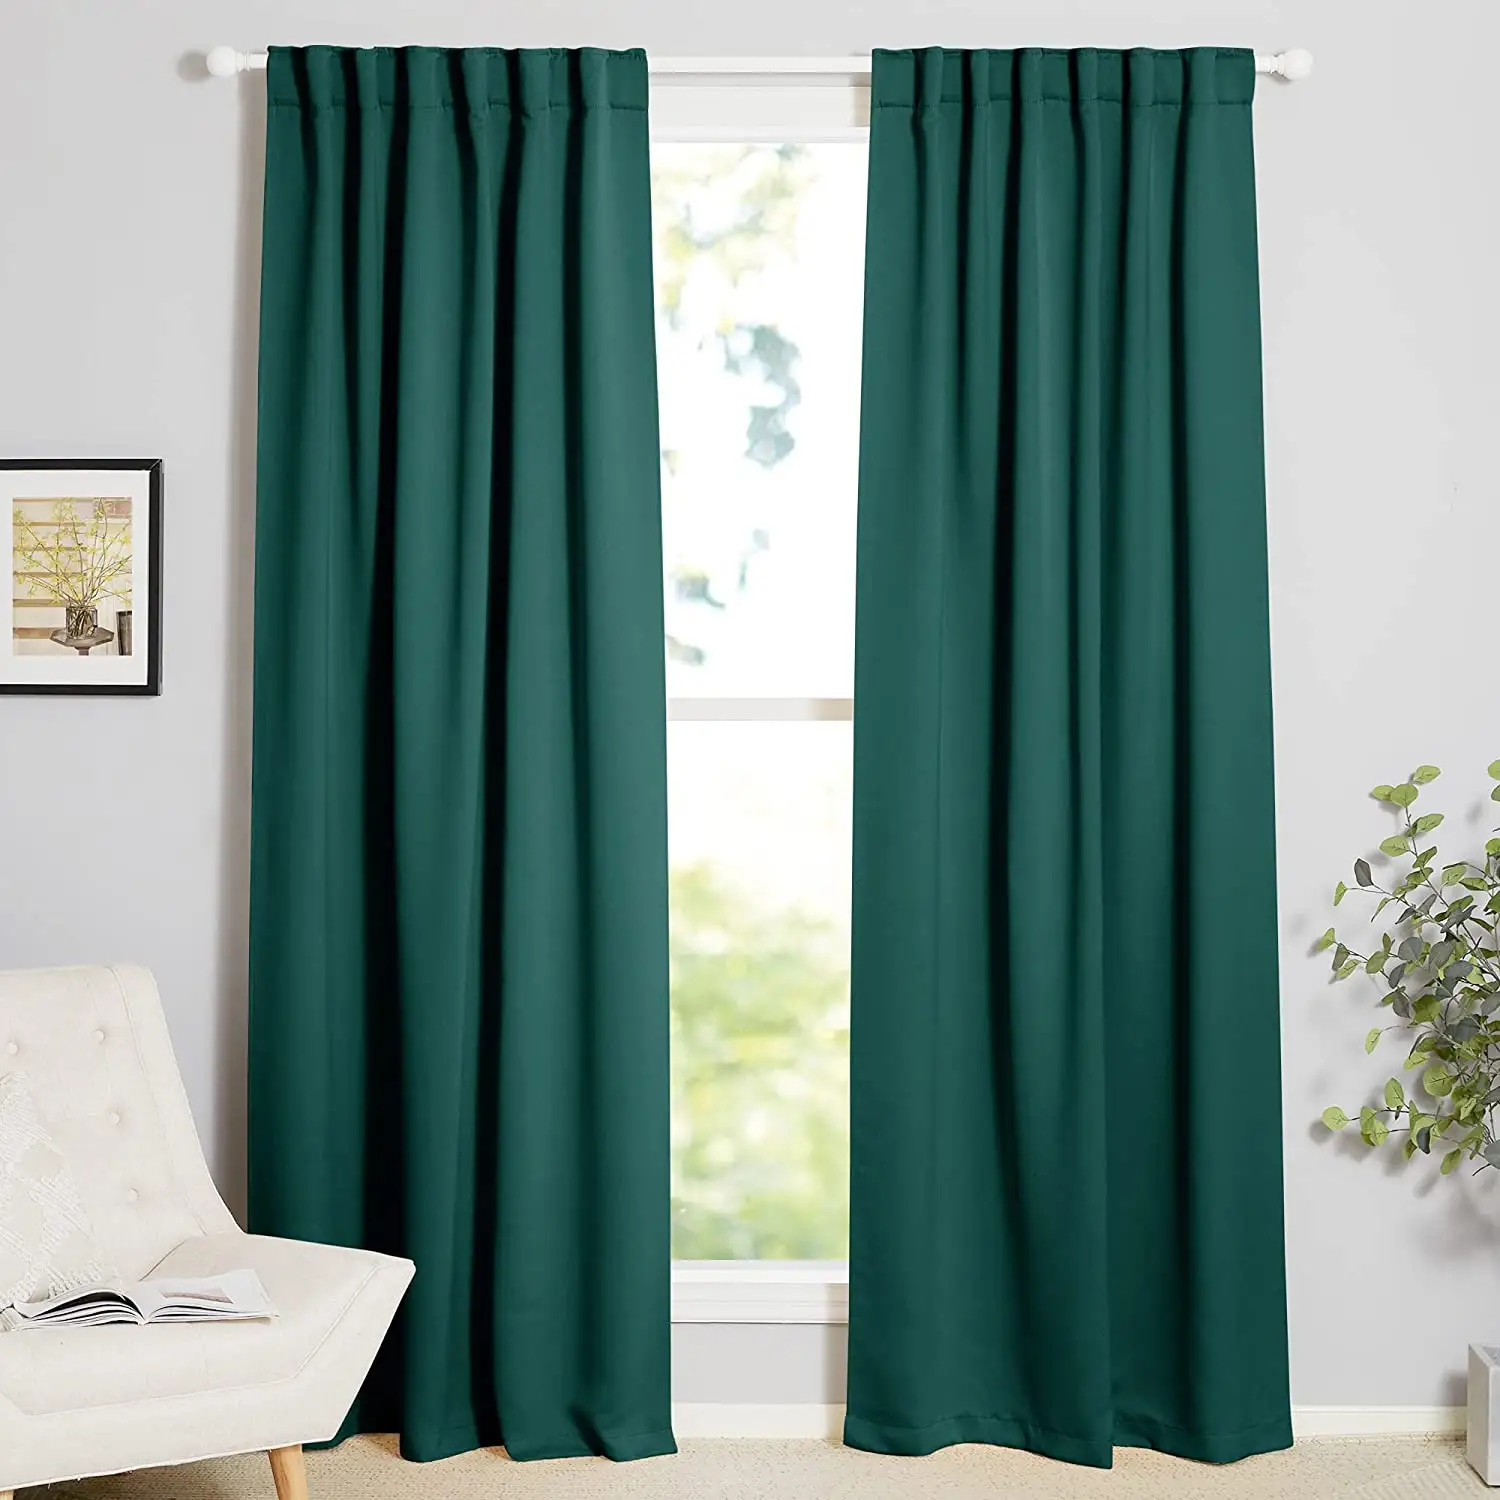 Modern Blackout Printed Curtain Living Room Bedroom Home Decoration Polyester Window Curtains for the Living Room